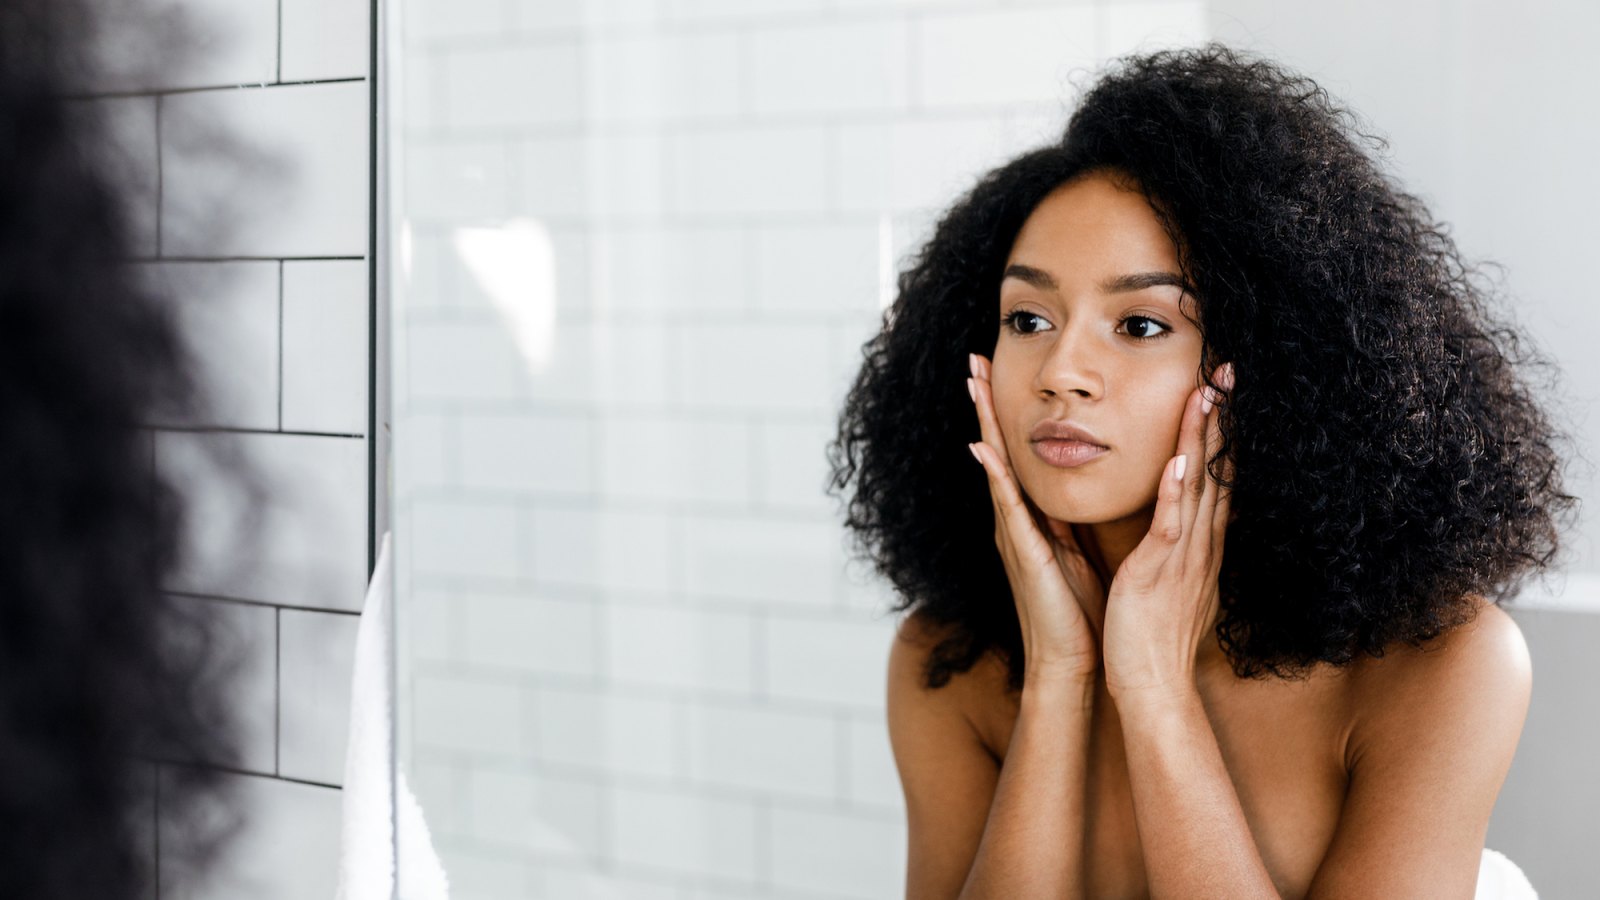 Mixed race woman massaging her face and looking at a mirror